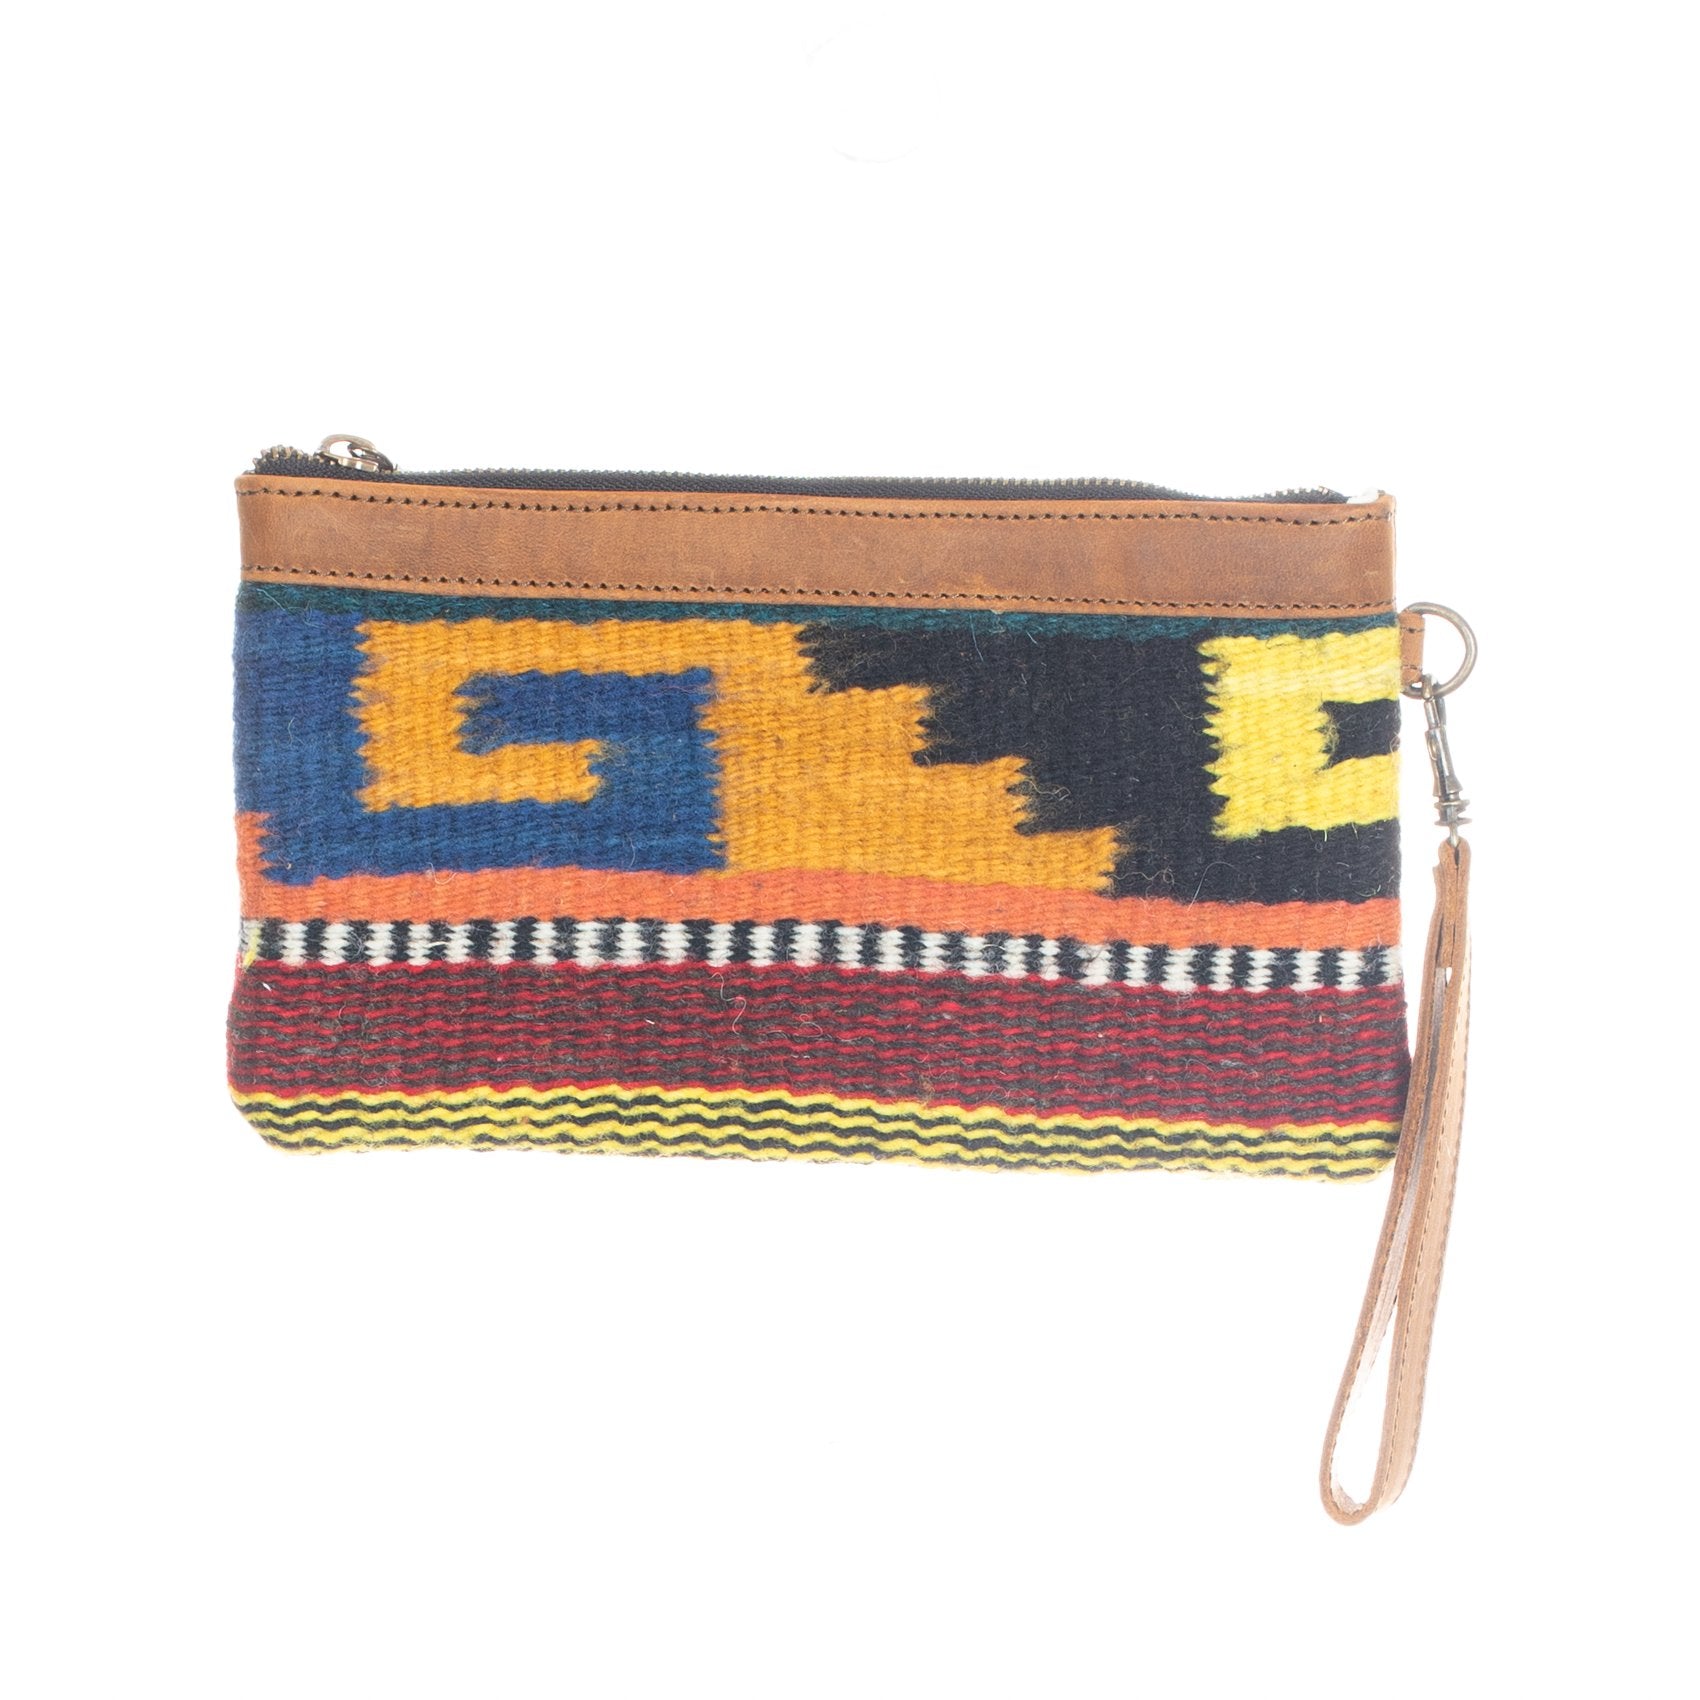 THE PERFECT CLUTCH - MEXICO COLLECTION - HANDWOVEN NO. 94252 - TOBACCO LEATHER